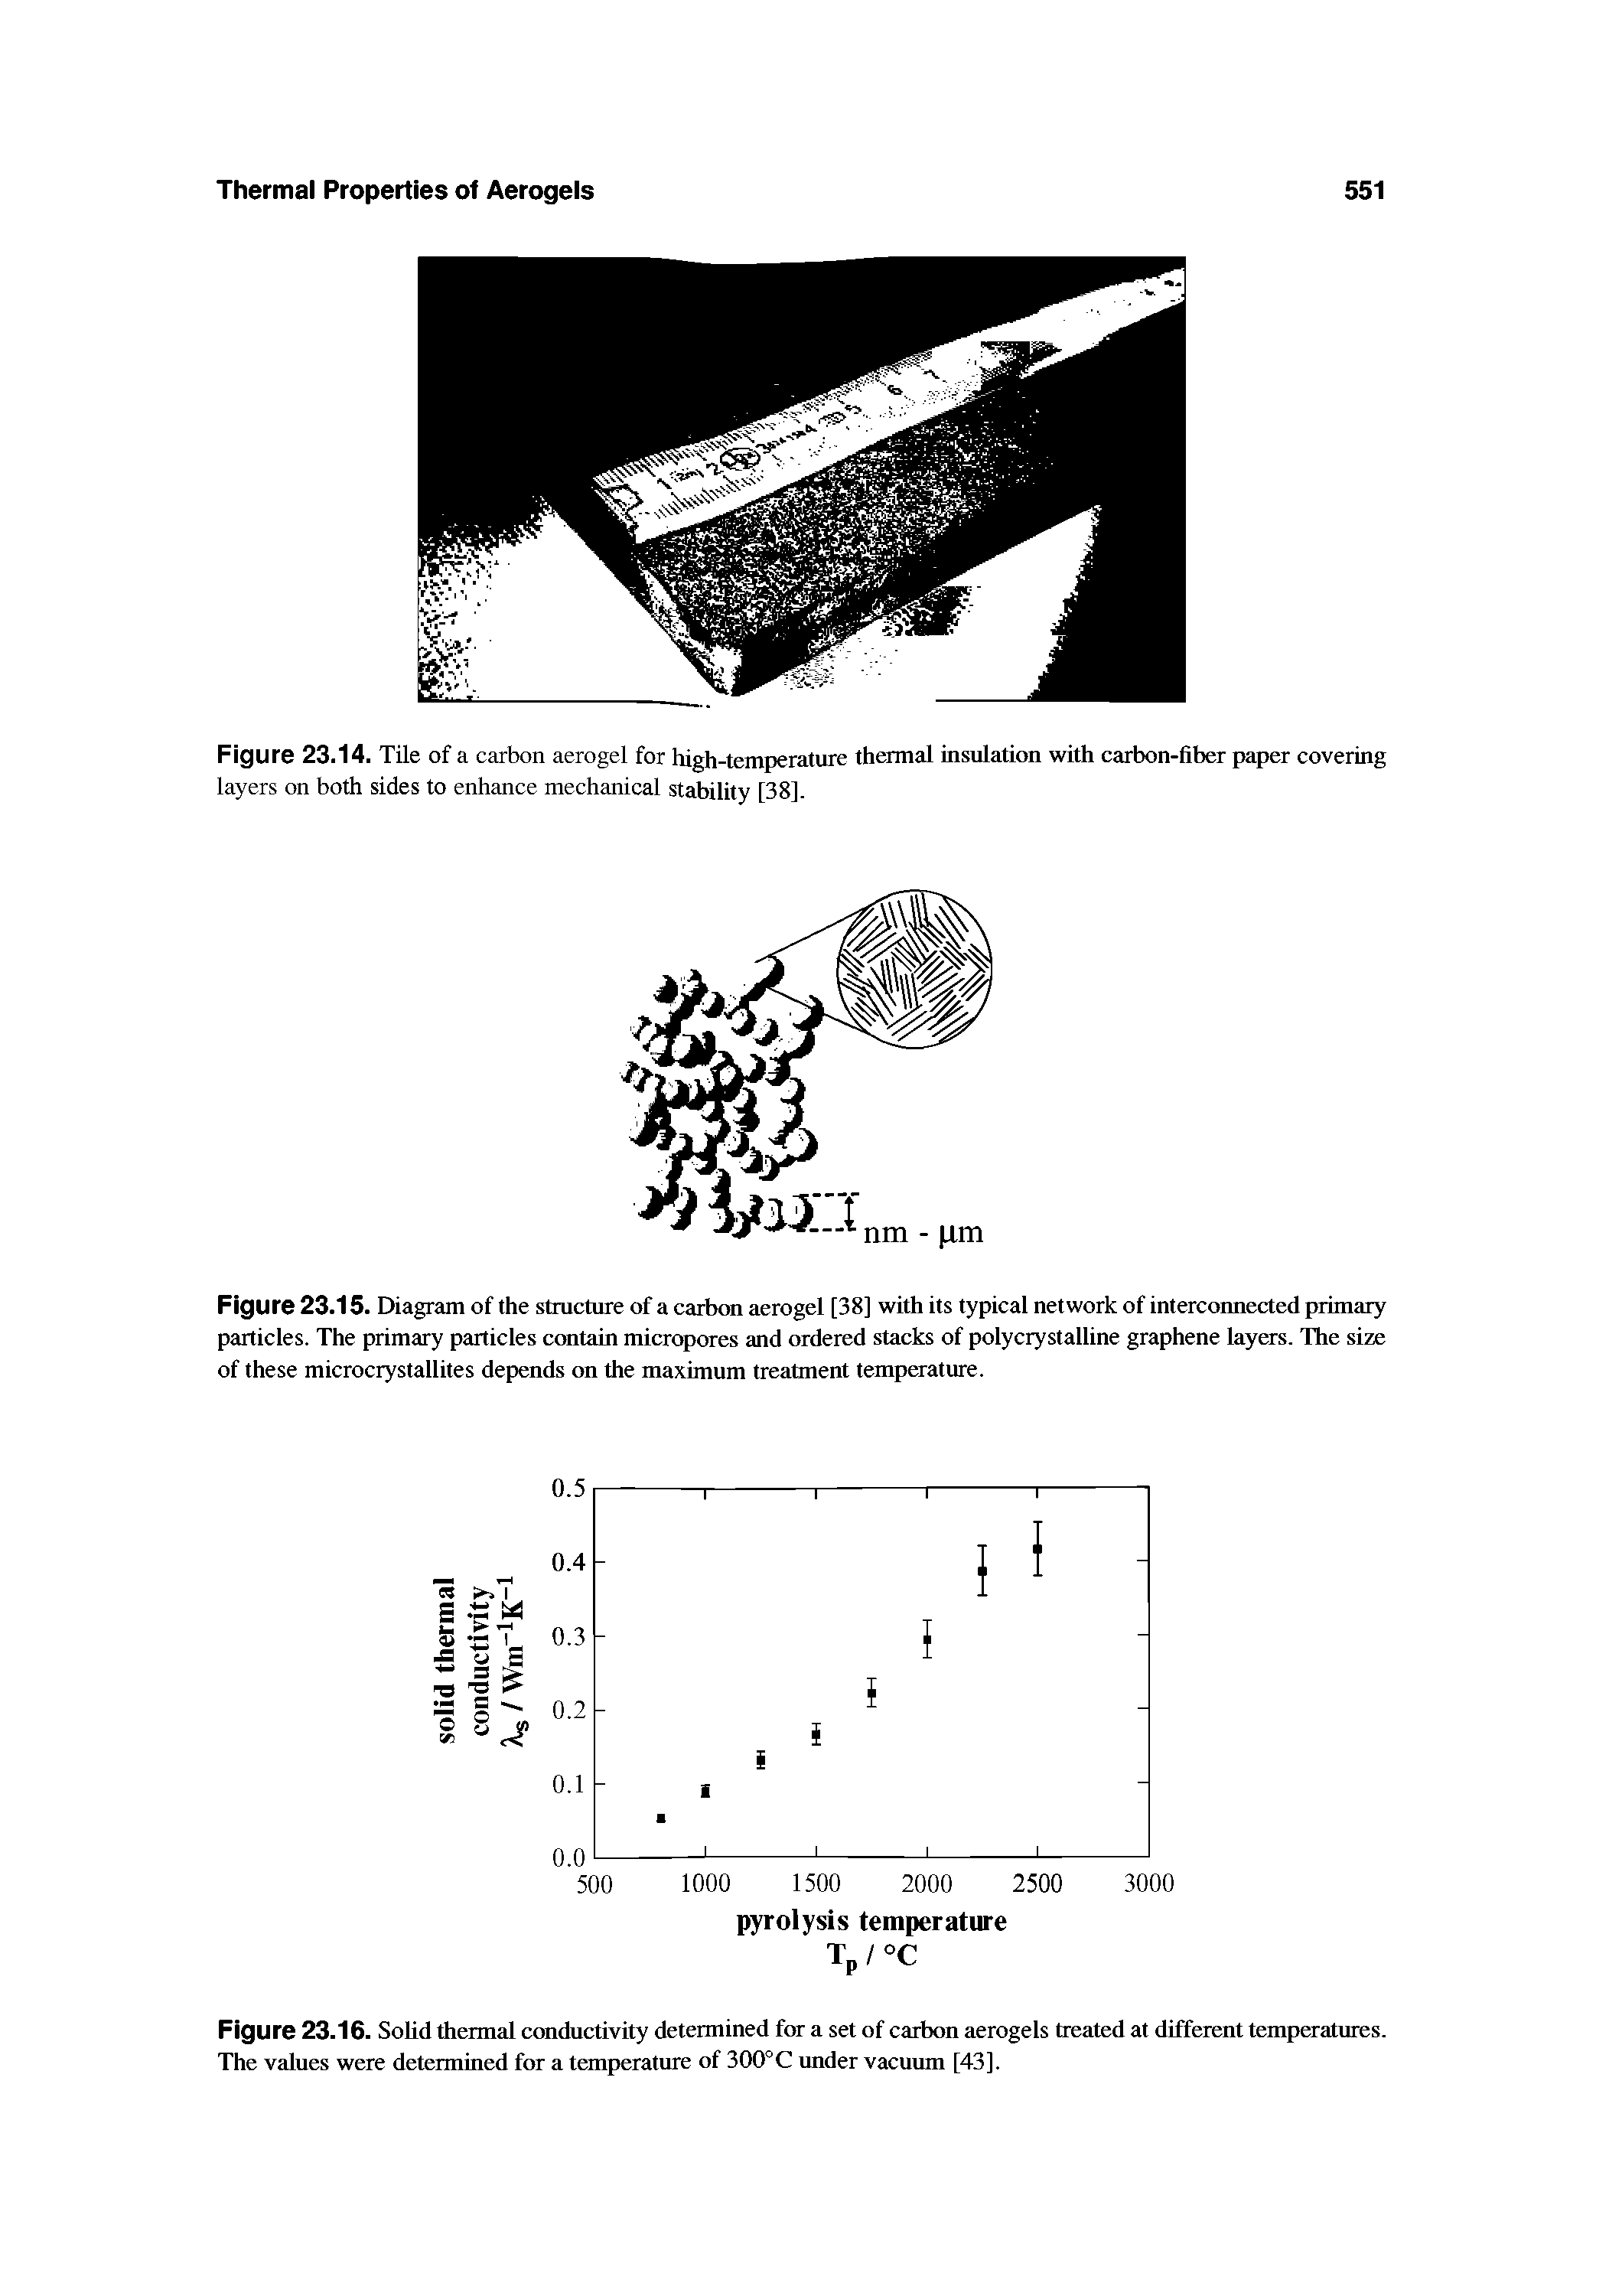 Figure 23.16. Solid thermal conductivity determined for a set of carbon aerogels treated at different temperatures. The values were determined for a temperature of 300°C under vacuum [43].